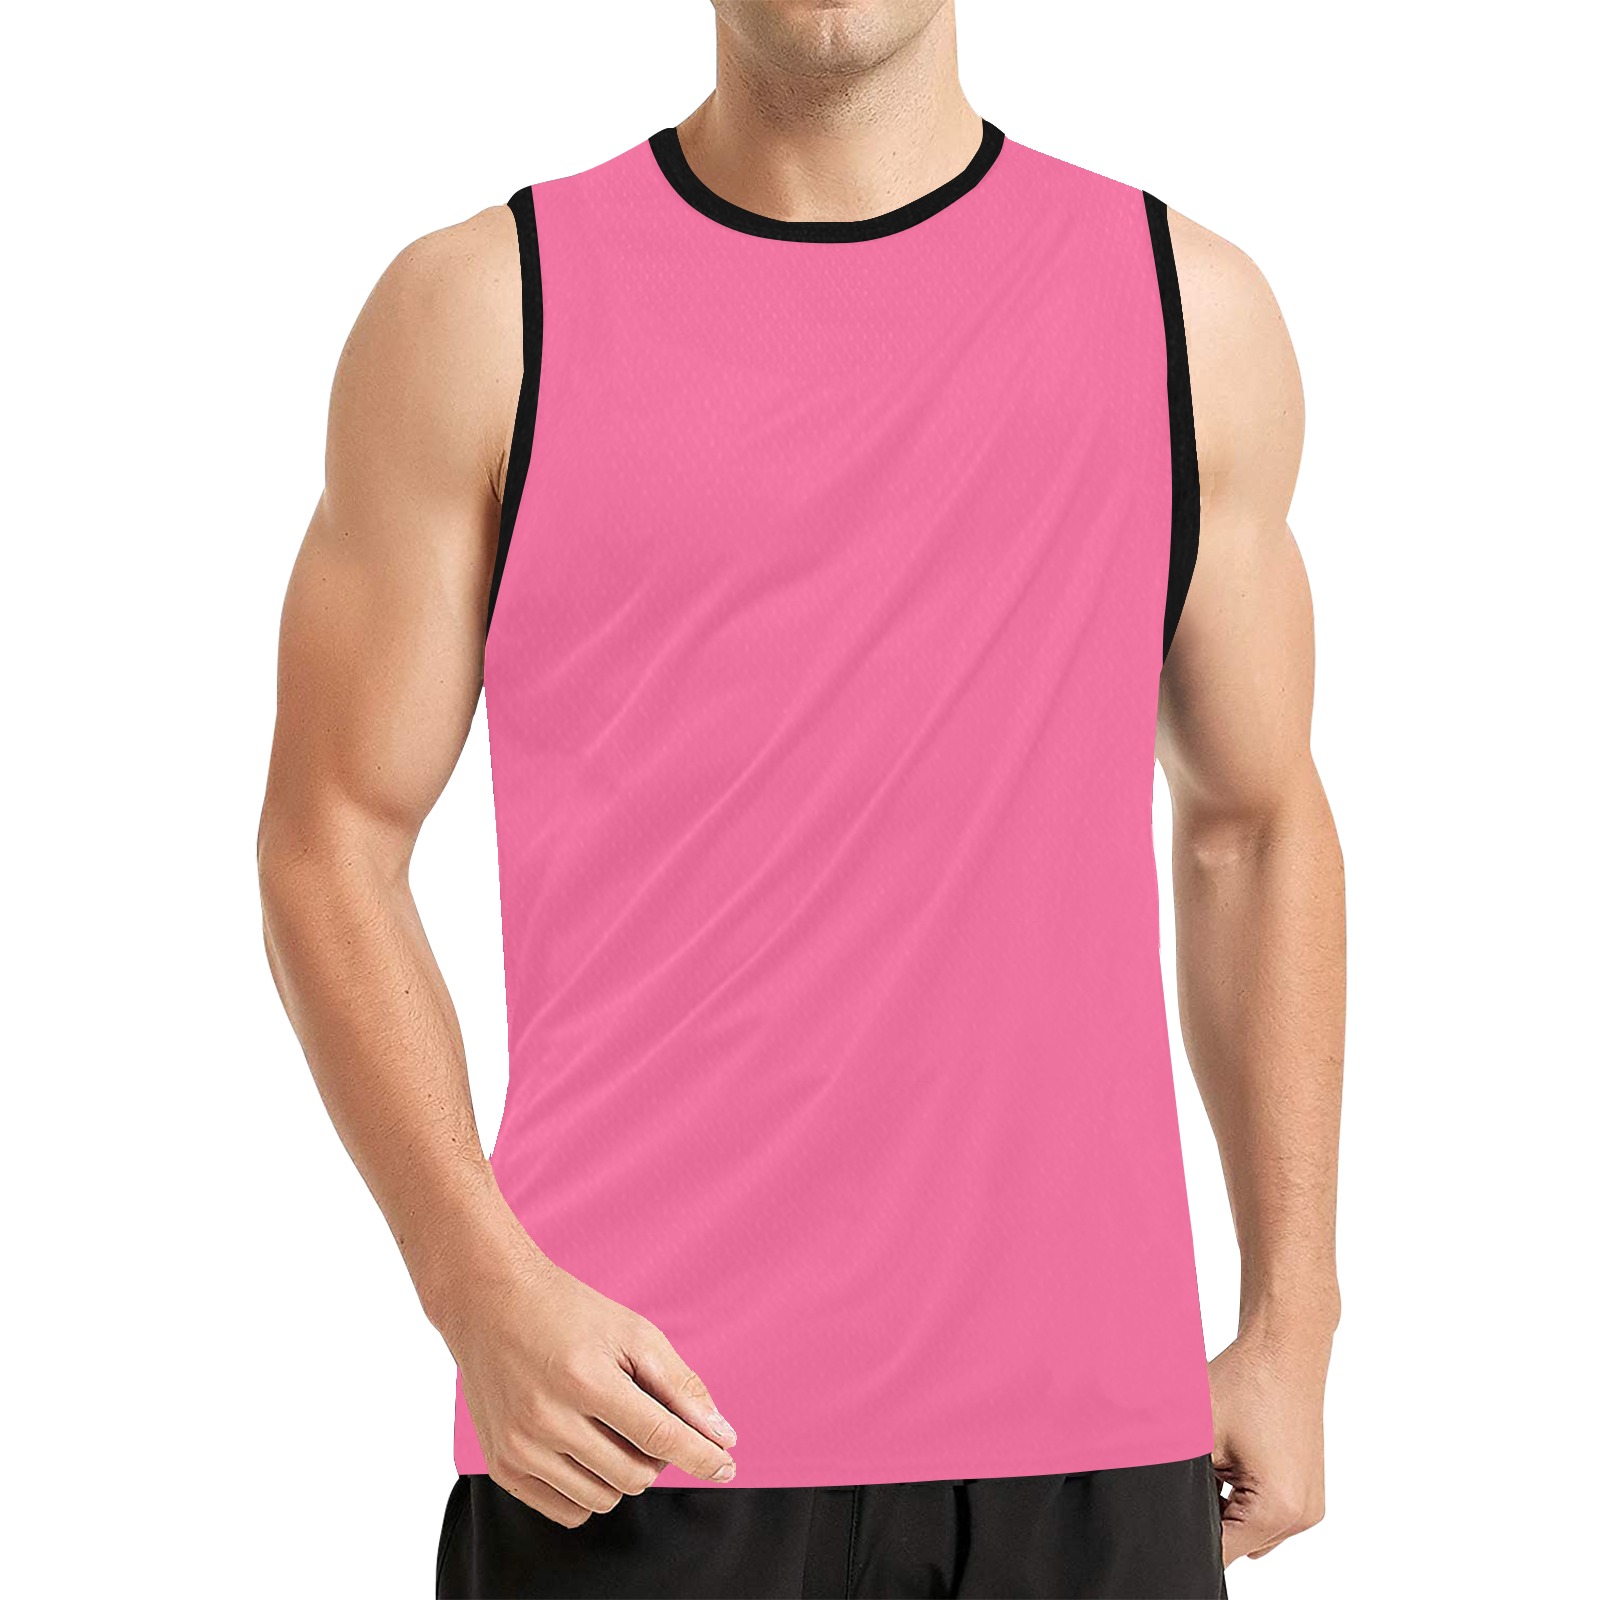 color French pink All Over Print Basketball Jersey